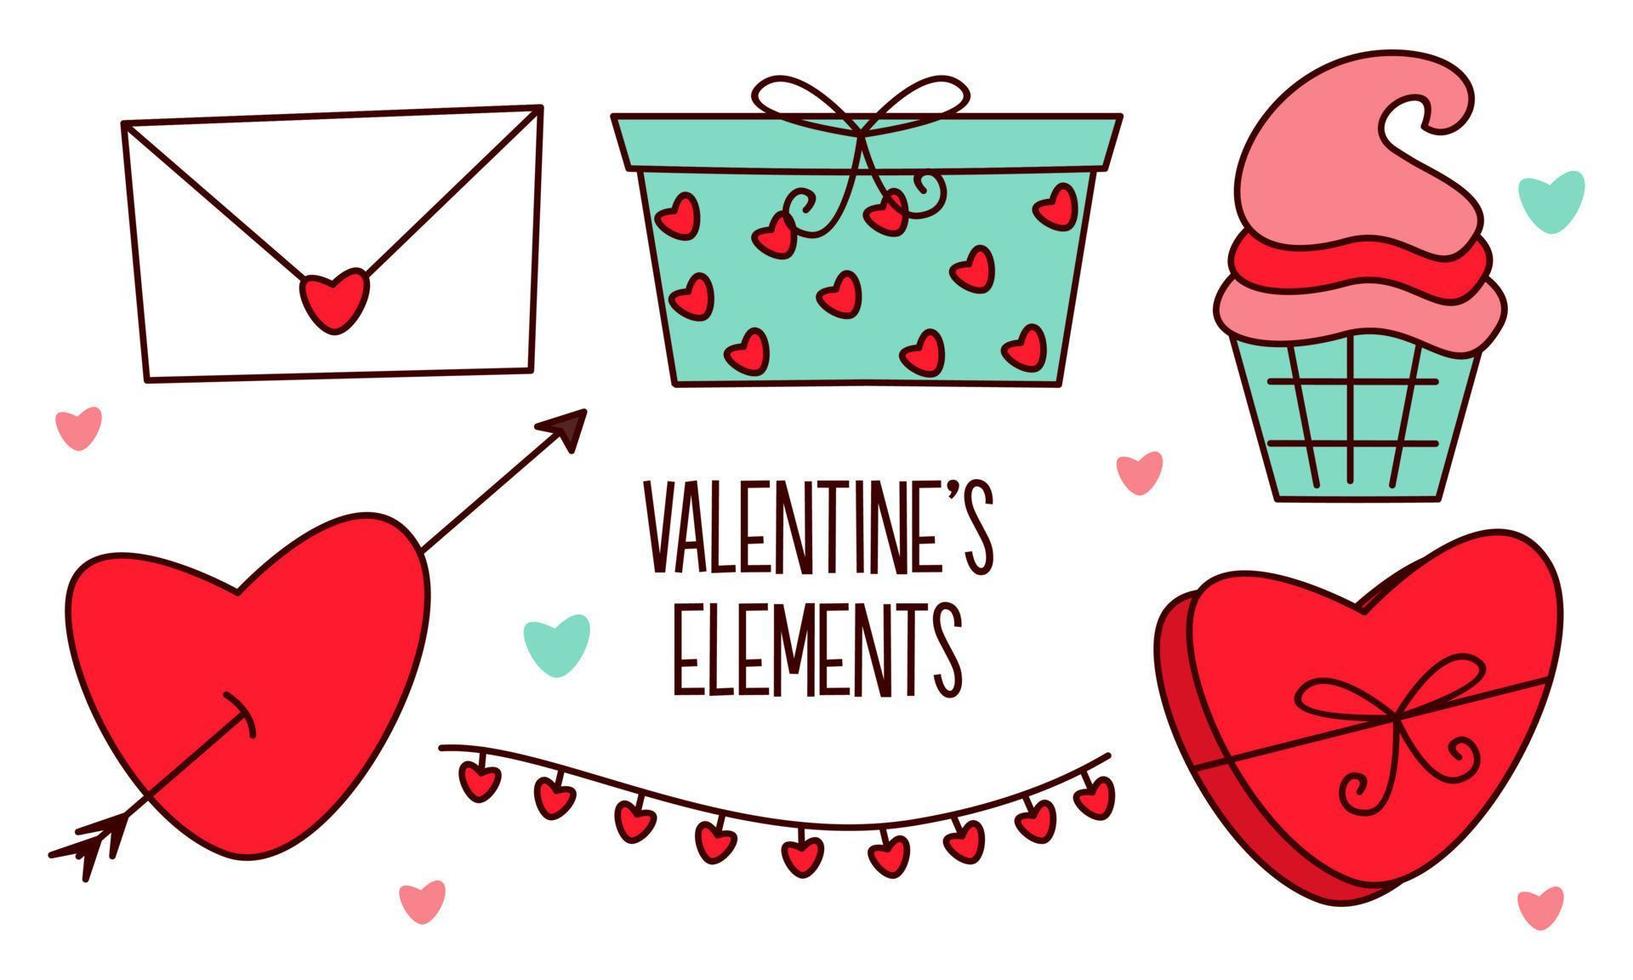 Assortment of colorful elements ready for valentine's day vector